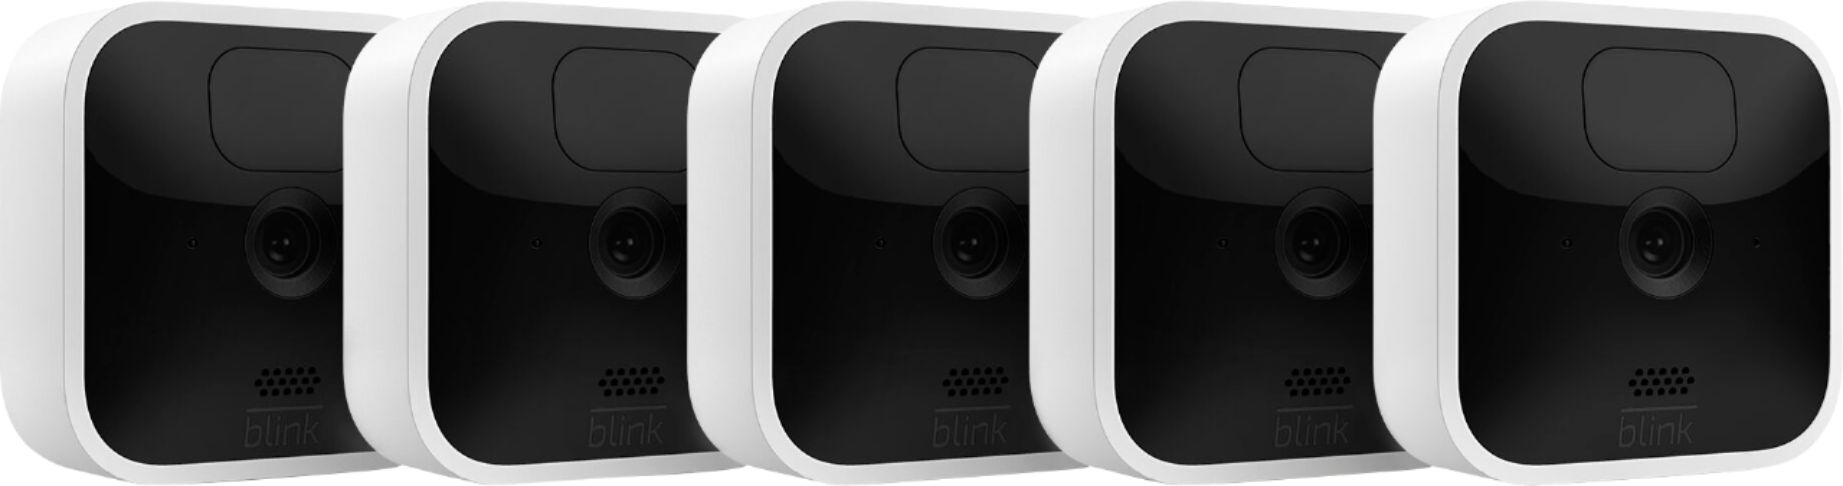 Blink Wireless Indoor Security Camera, One Camera Kit, White/Black  (B07X4BCRHB)